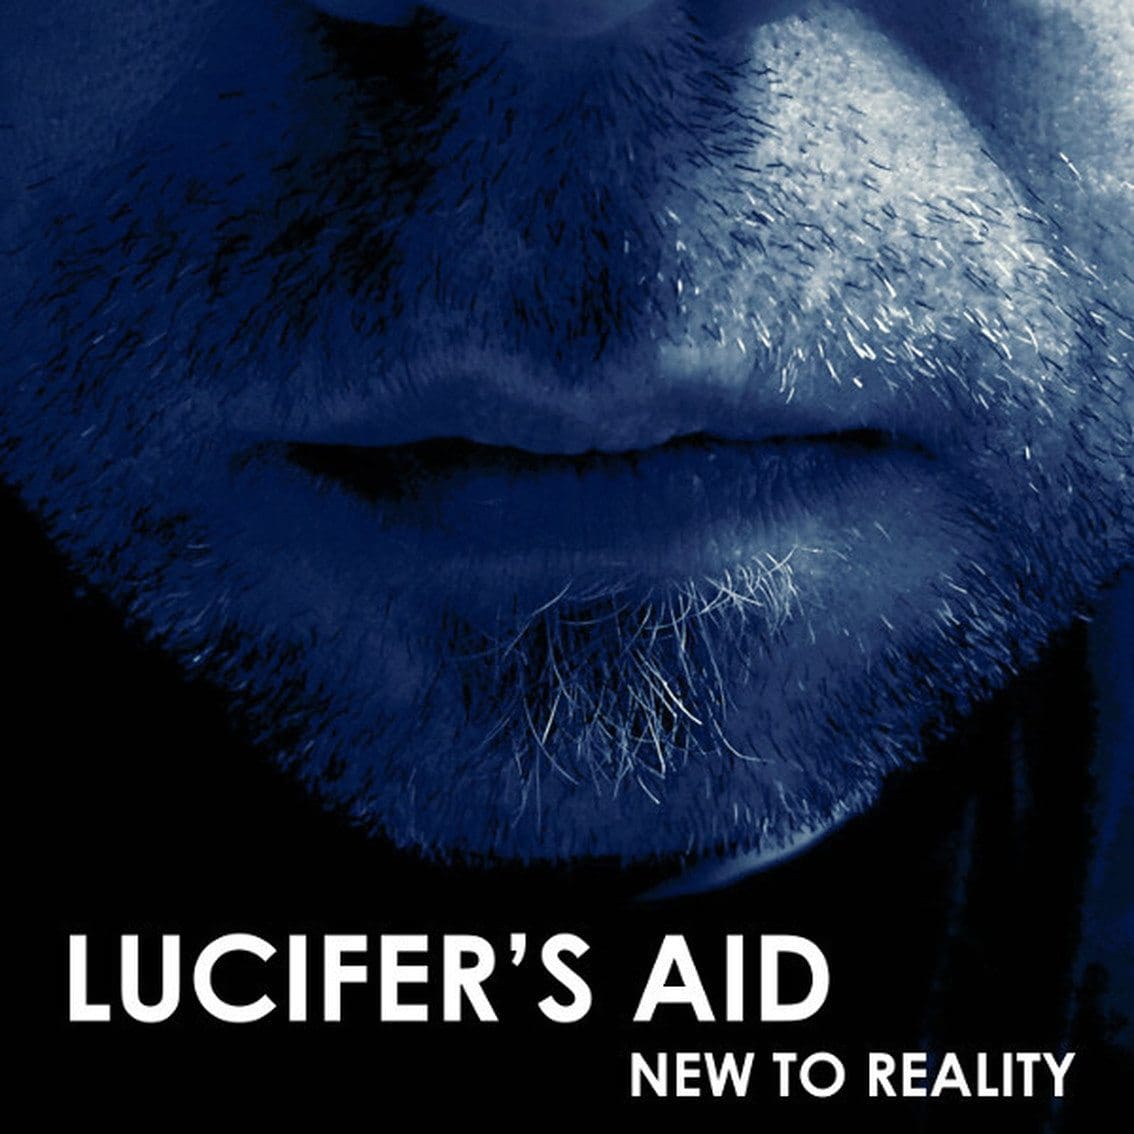 Lucifer's Aid debuts with 'New To Reality' - check already a first track